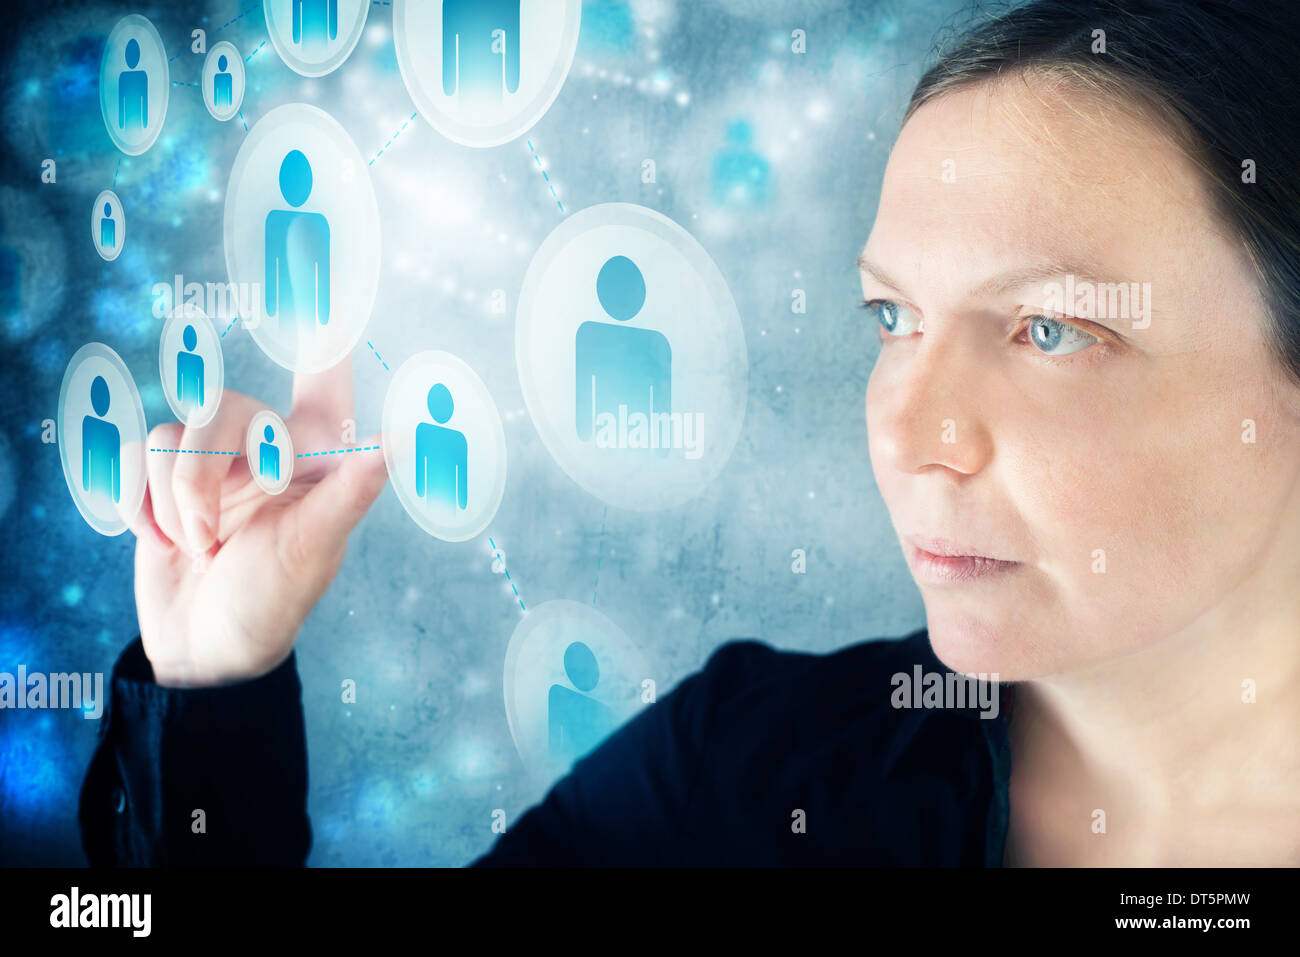 Businesswoman pressing display button on social networking scheme. Concept of modern communication through social networks. Stock Photo